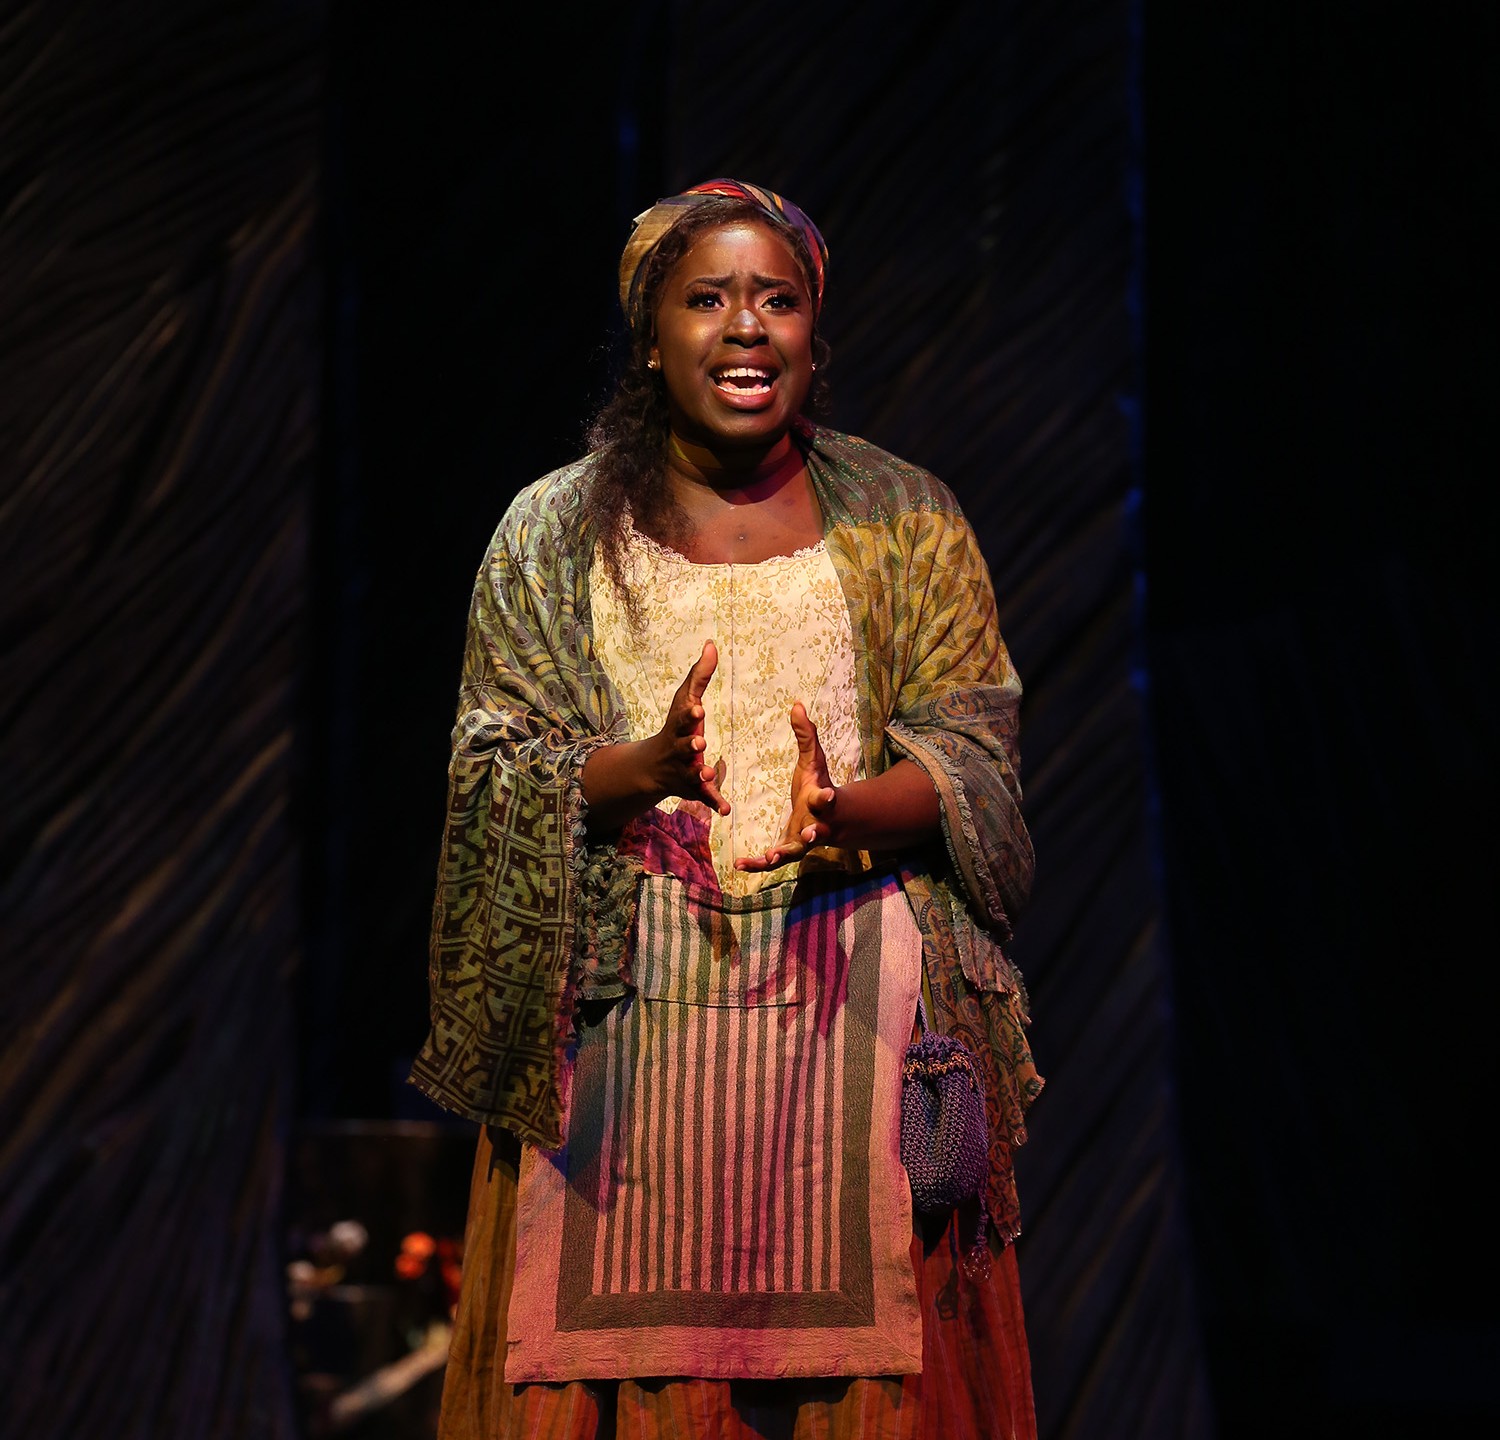 Baker’s Wife stands and sings. She wears a corseted top, a brightly patterned scarf of reds, blues and yellows on her head, and an ankle-length yellow skirt